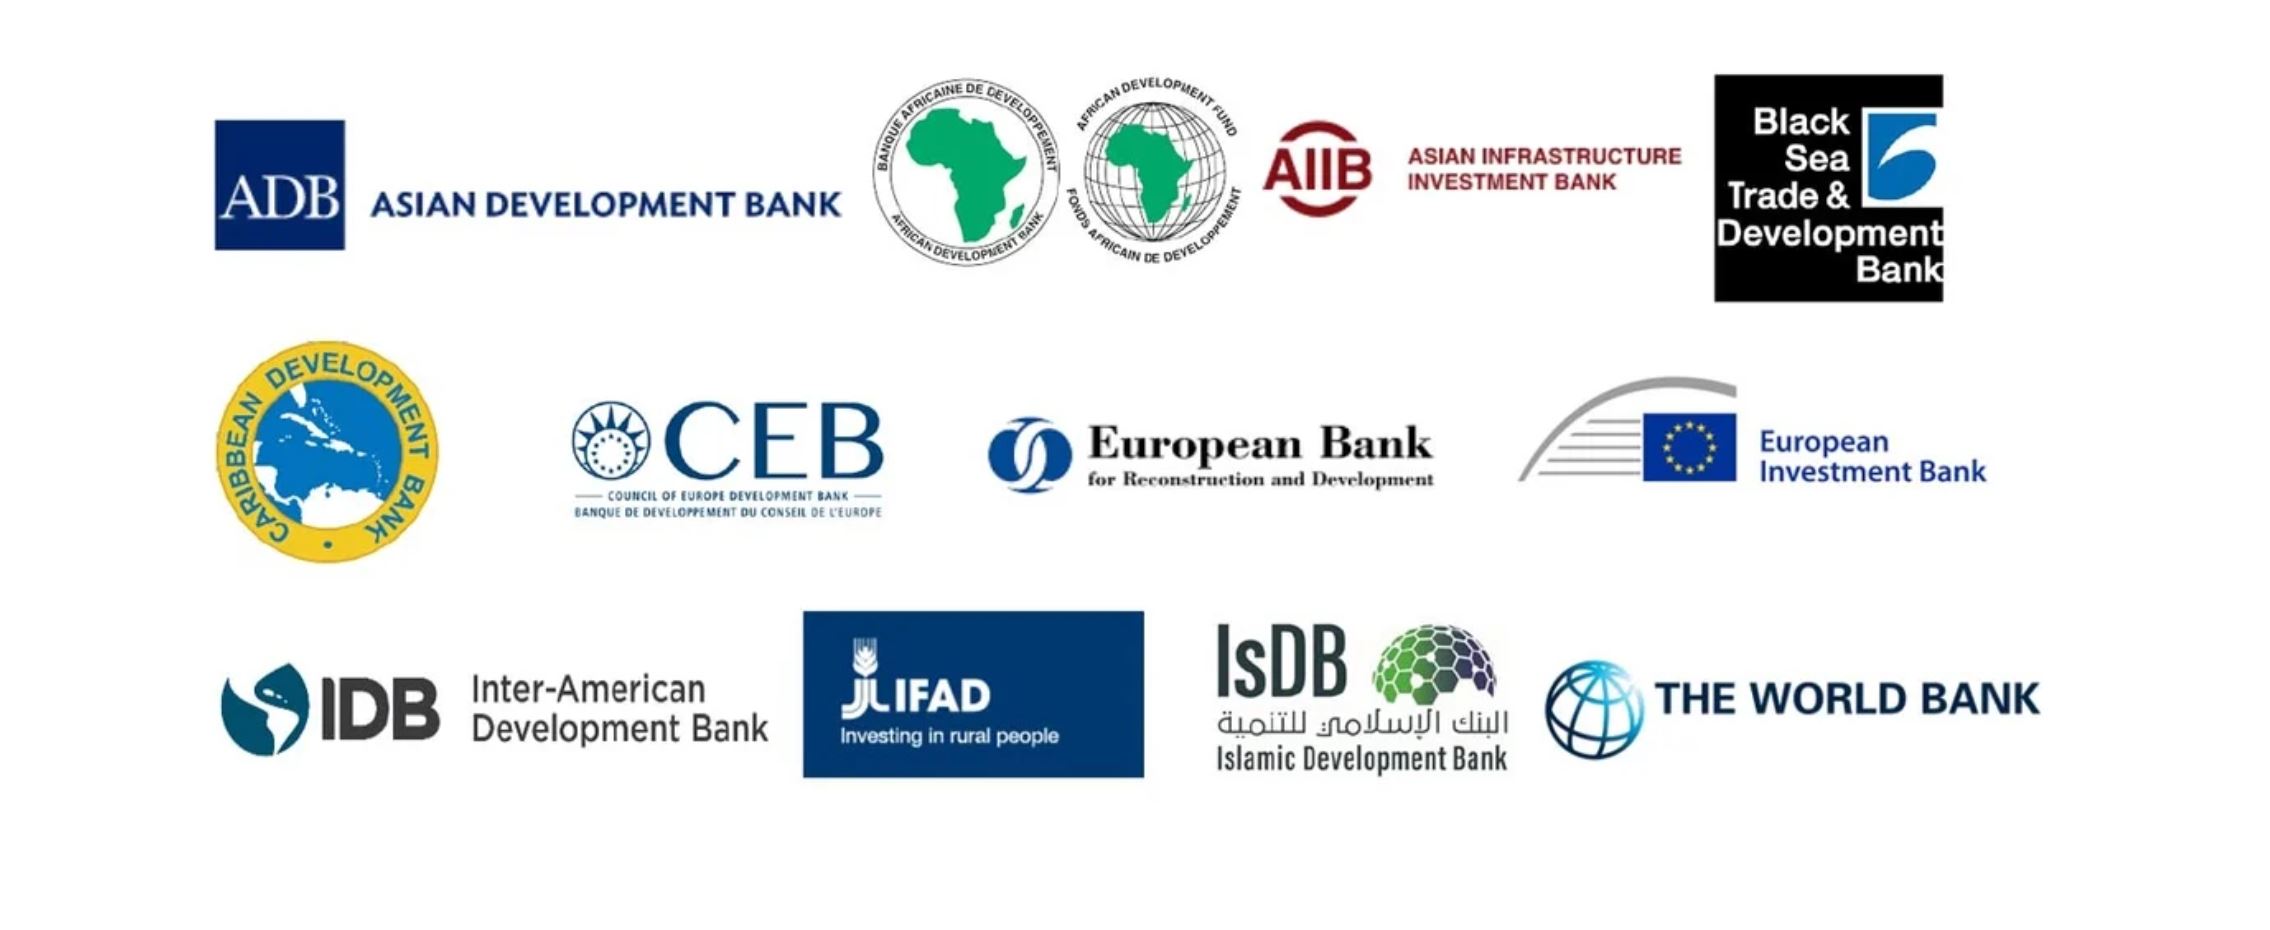 image featuring logos of 12 multilateral development banks